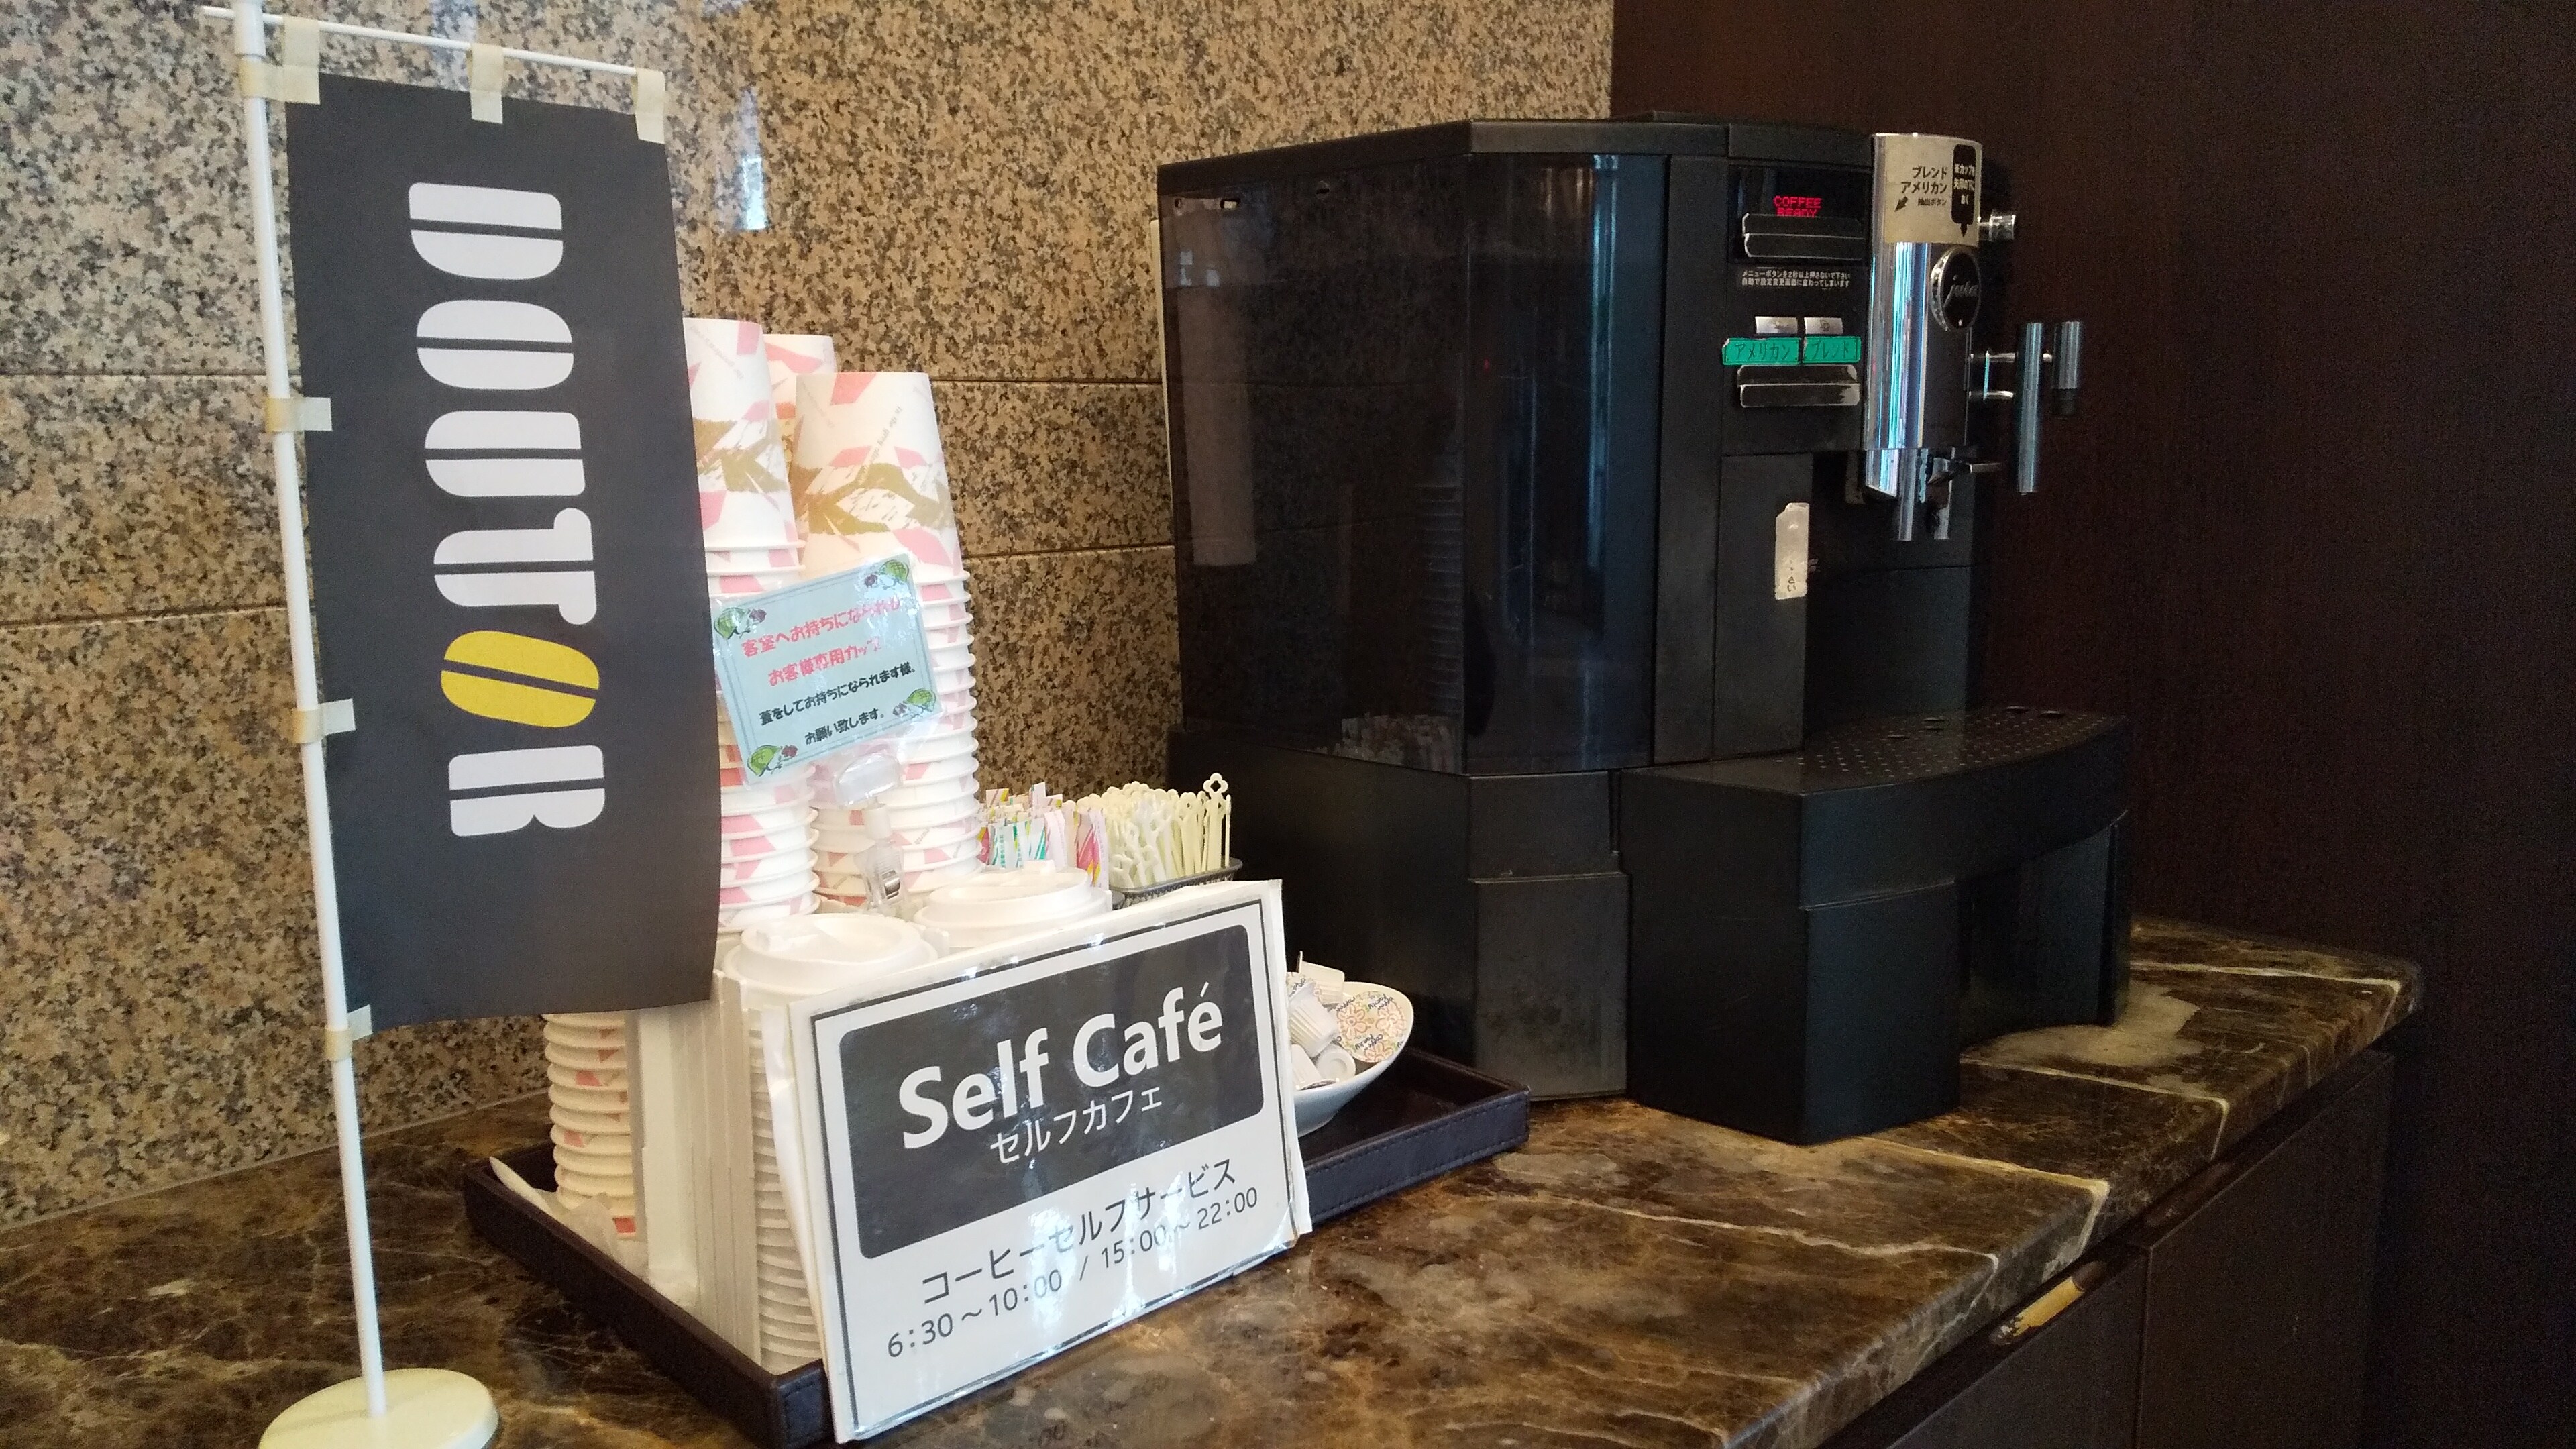 Self-cafe 15: 00-22: 00 6: 30-10: 00 ☆ Please use a paper cup with a lid to reach your room ☆